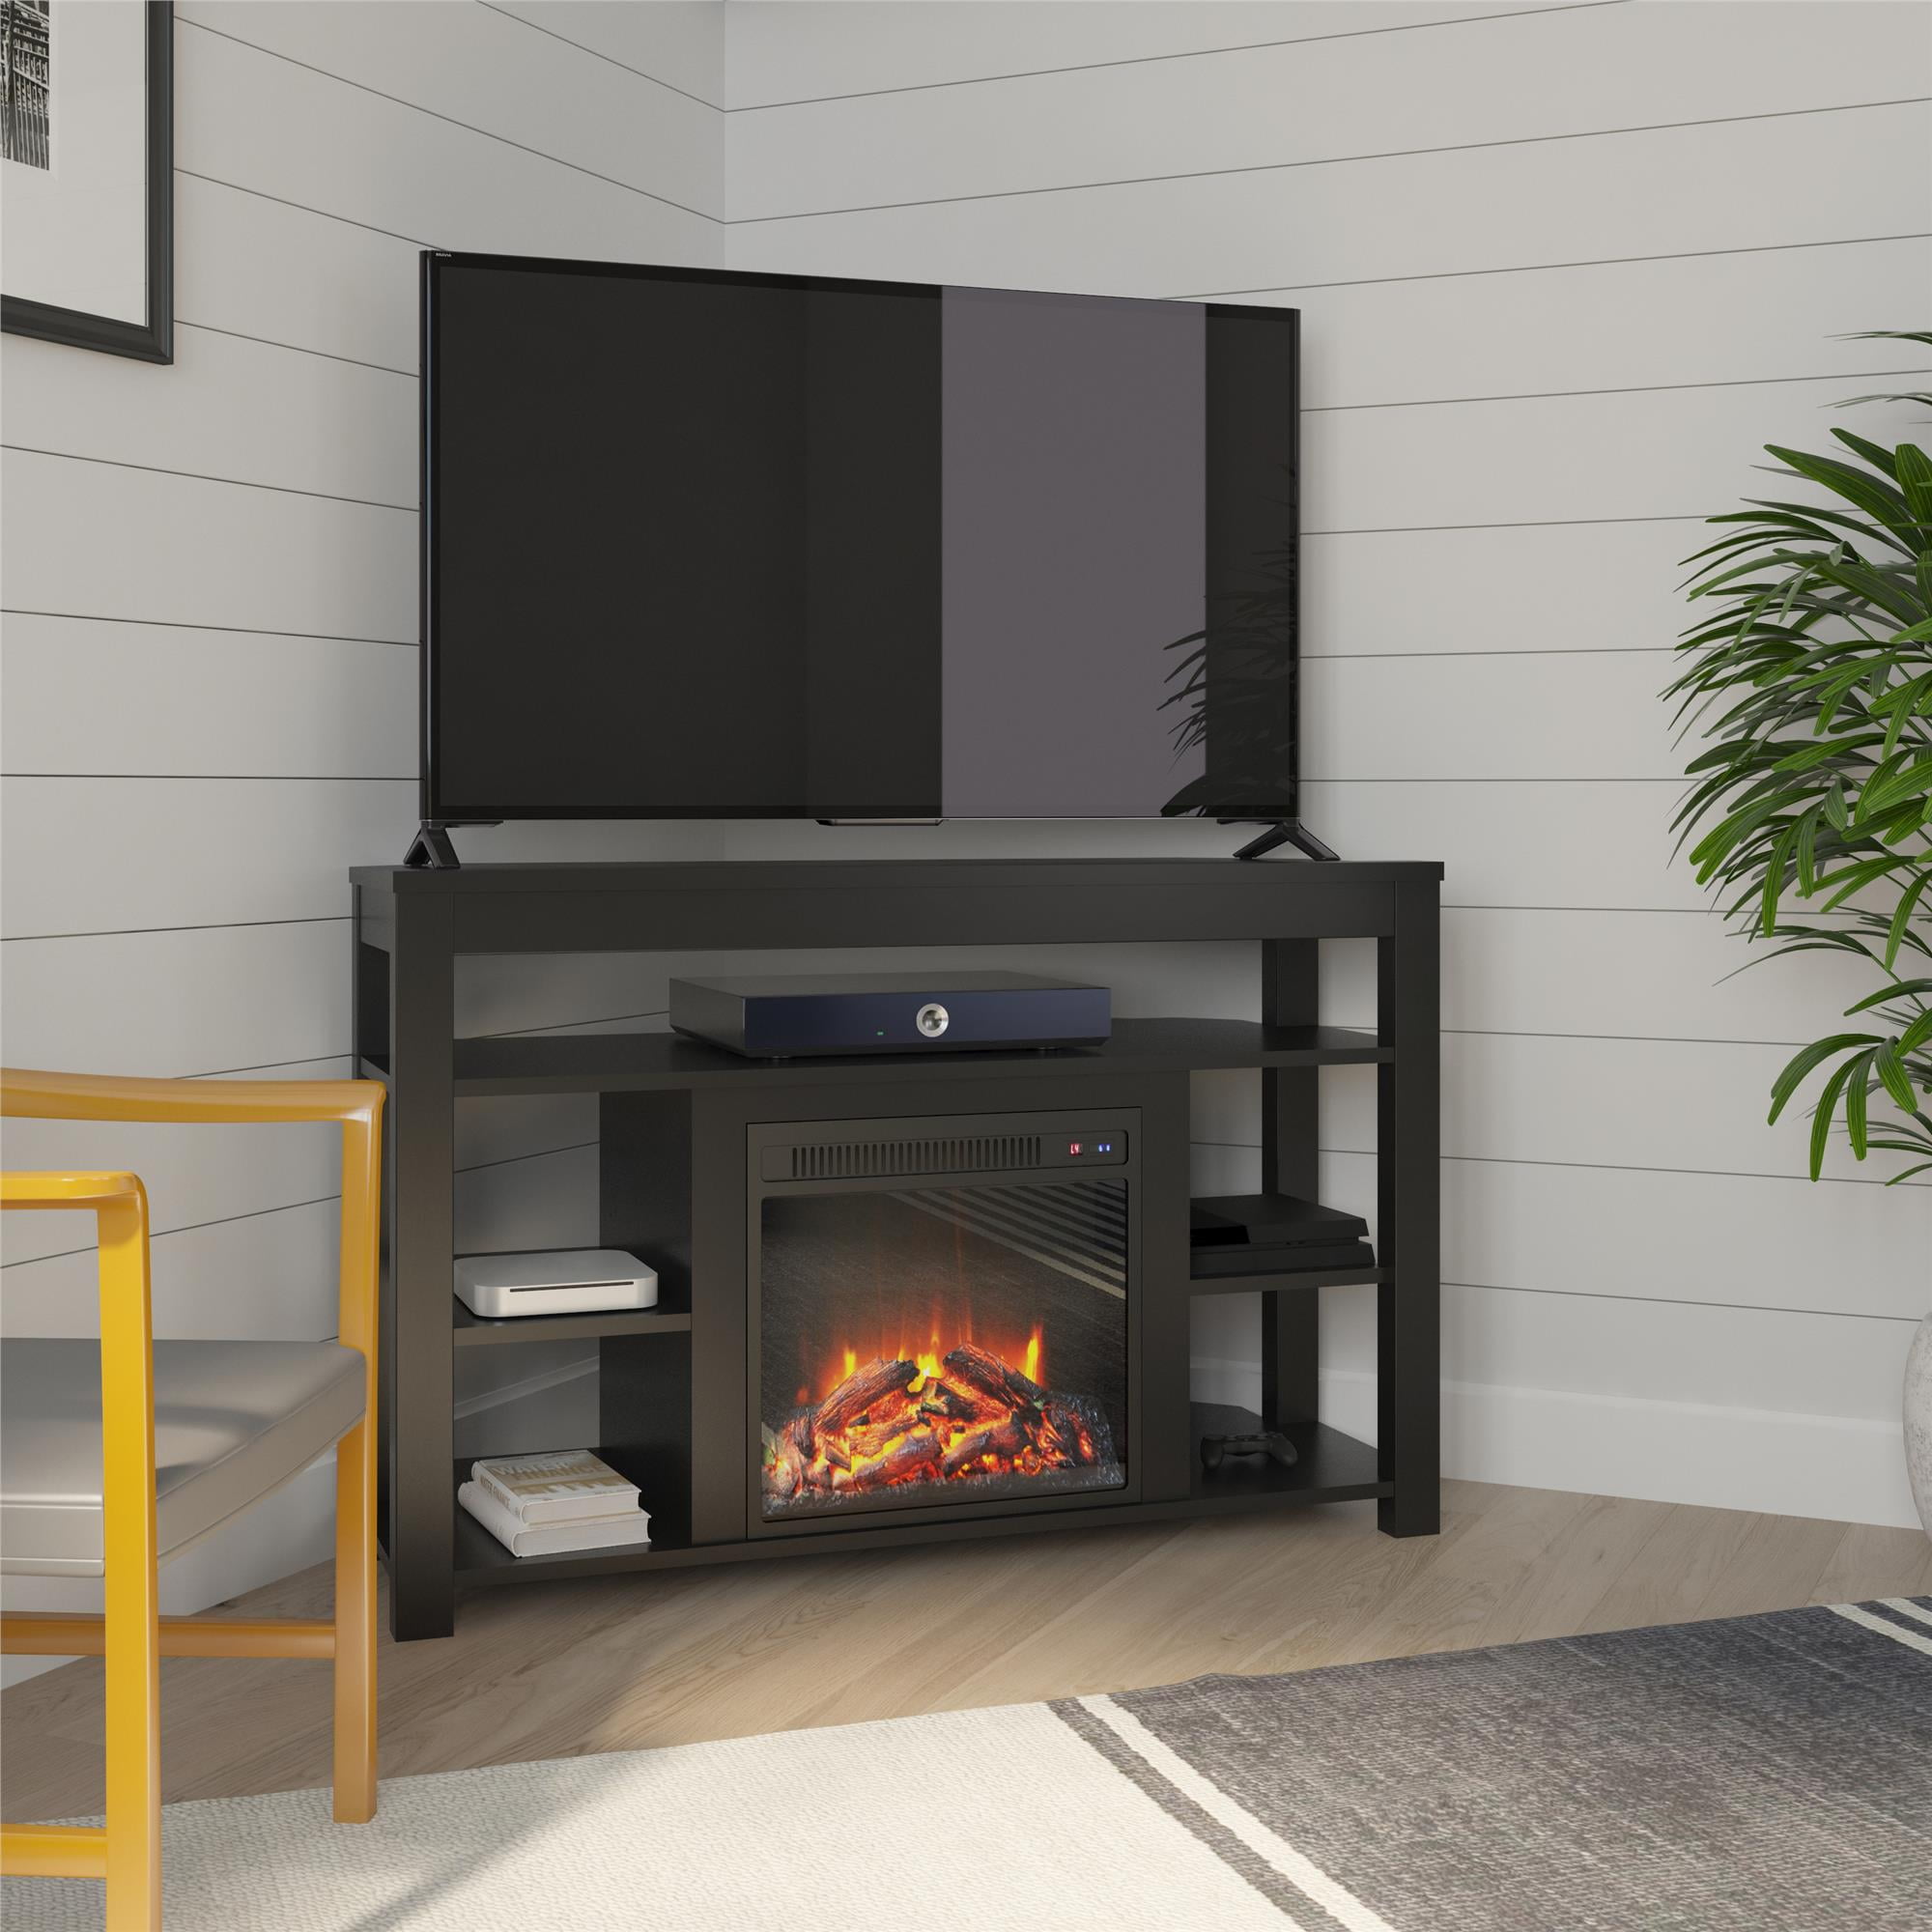 A Corner Faux Fireplace TV Stand: Where Style Meets Functionality